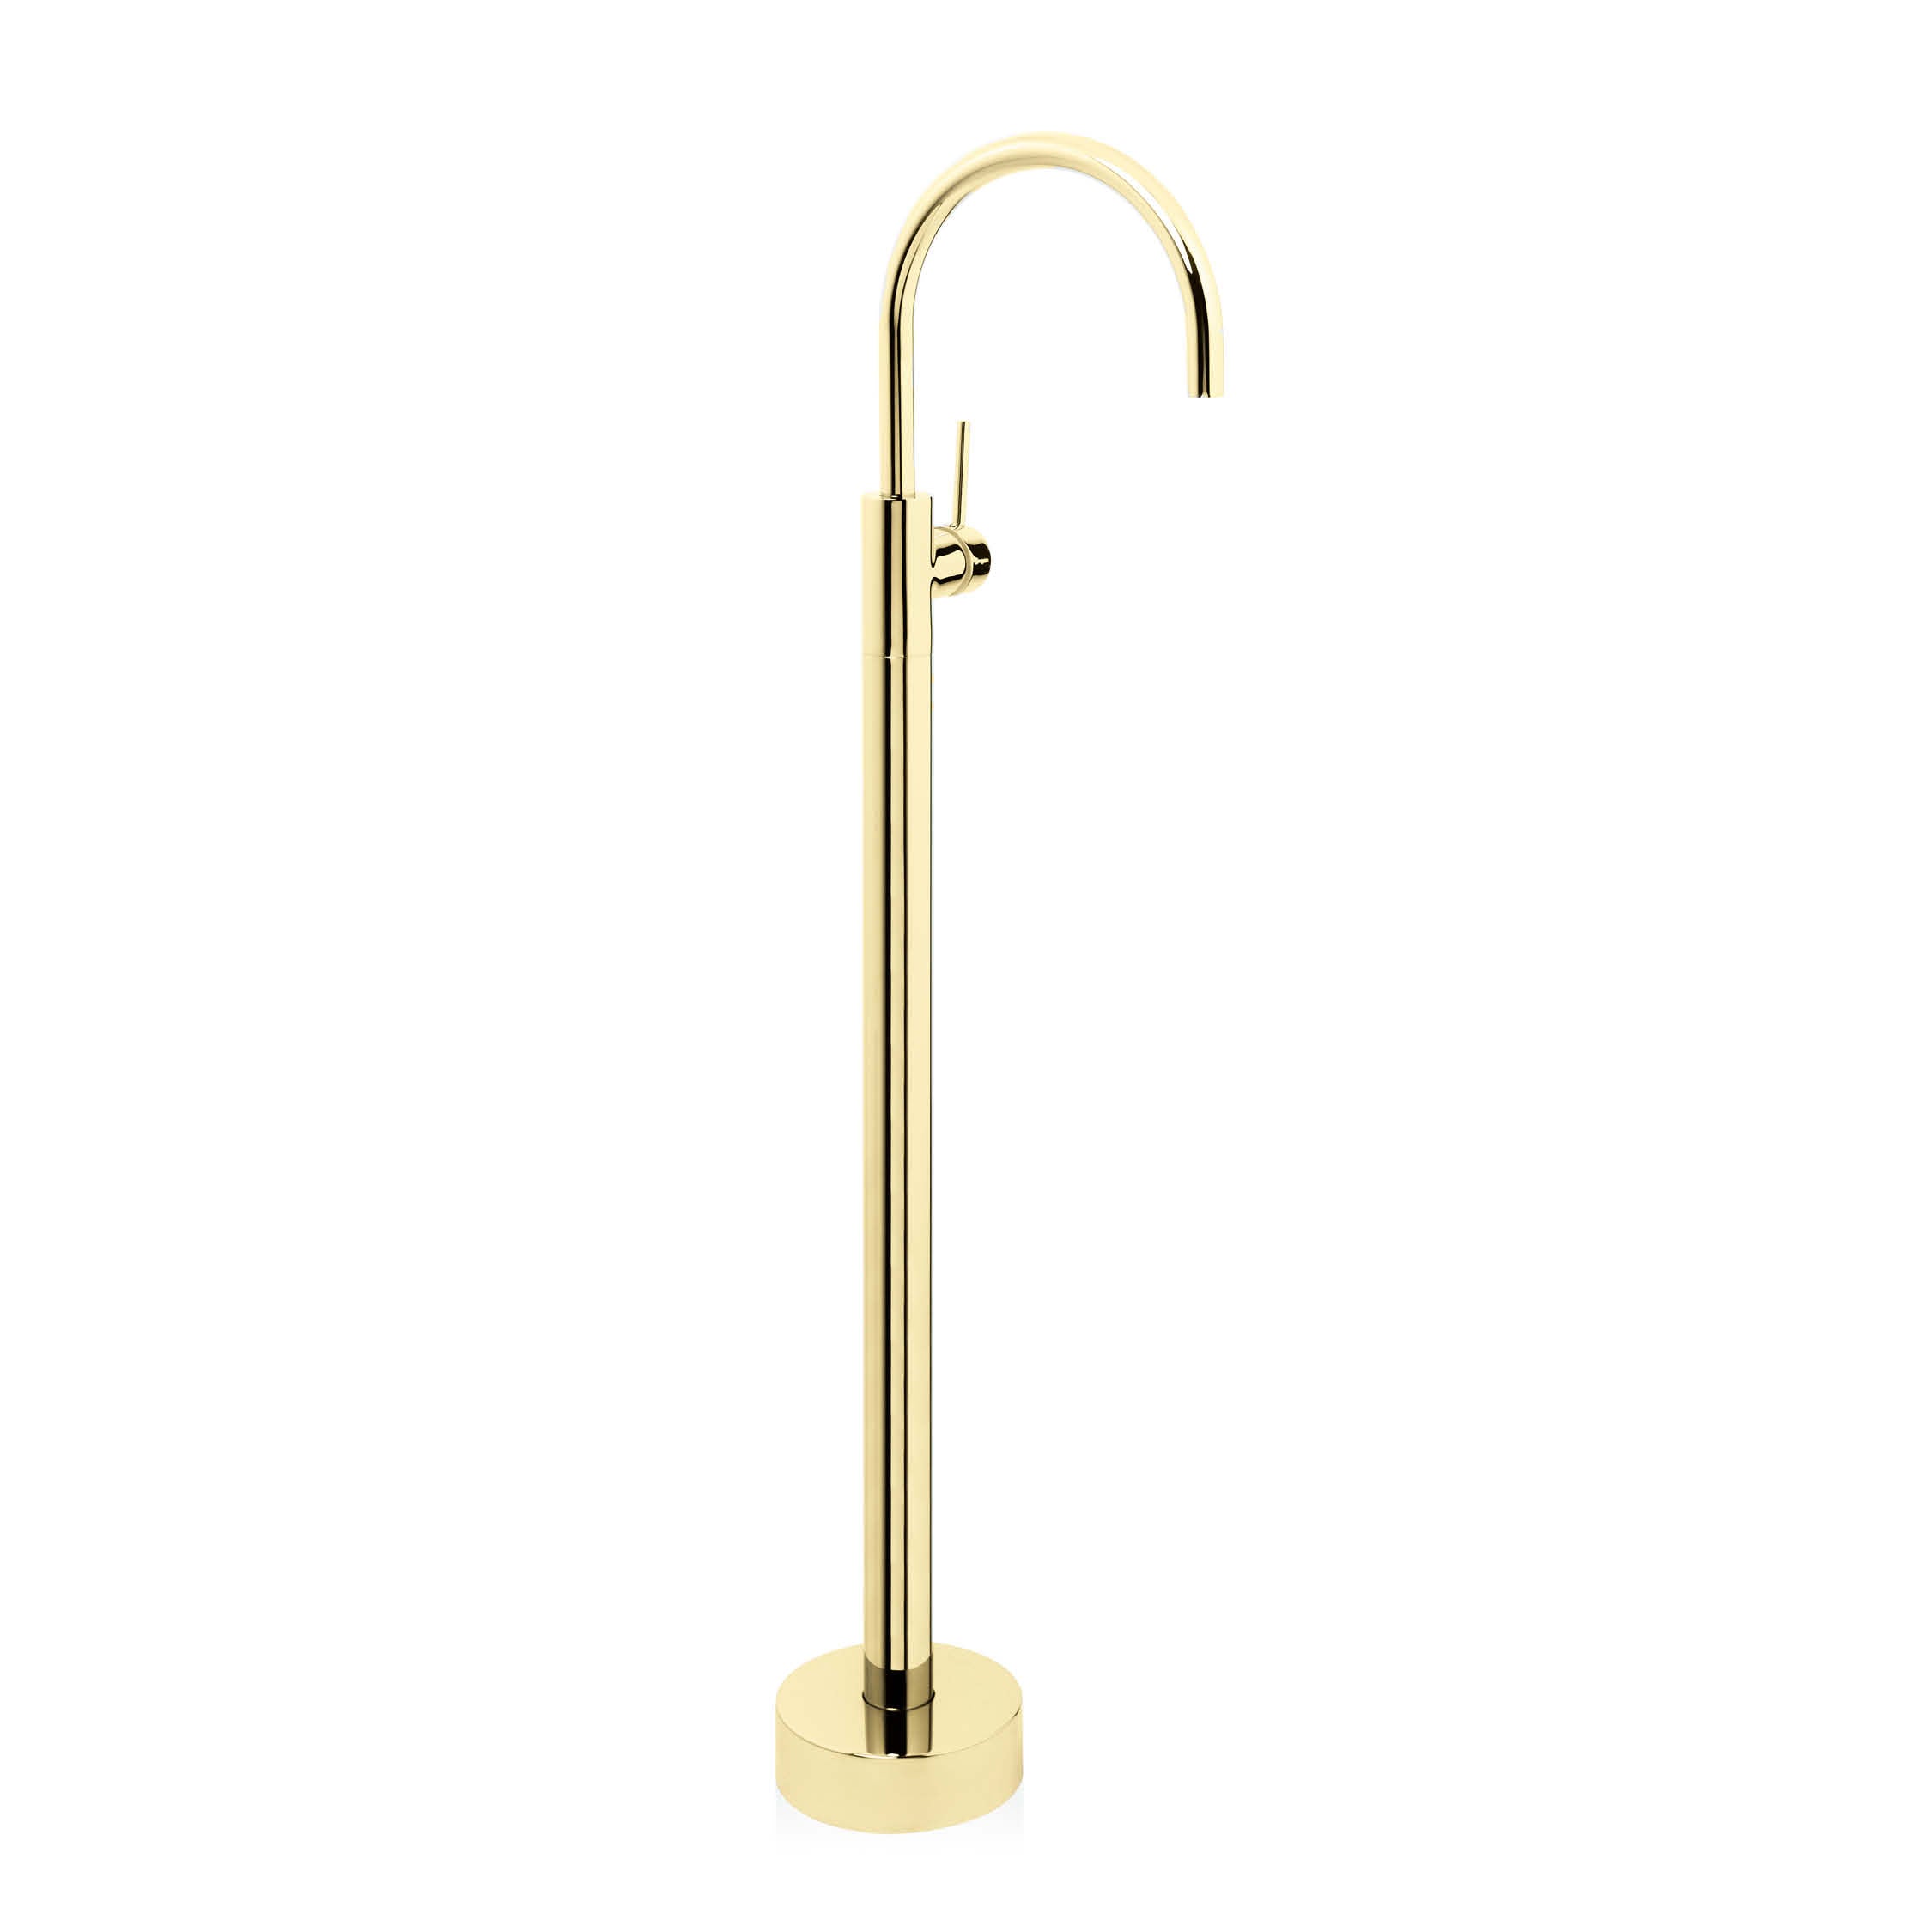 Bondi Floor-Mounted Bath Spout with Mixer in Raw Brass